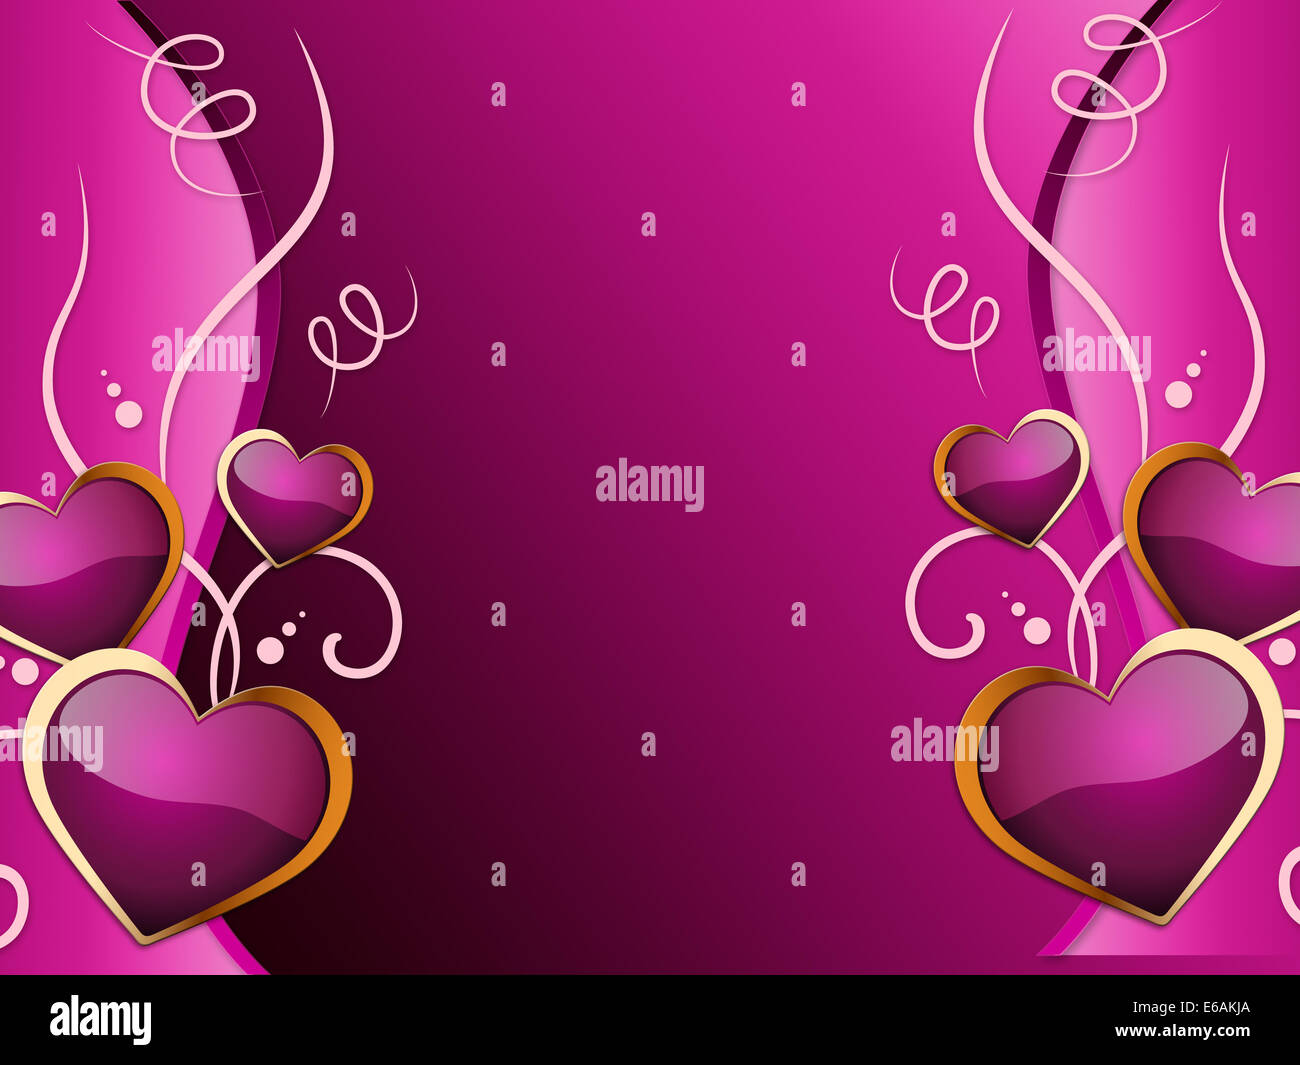 Hearts Background Meaning Romance Attraction And Wedding Stock Photo - Alamy